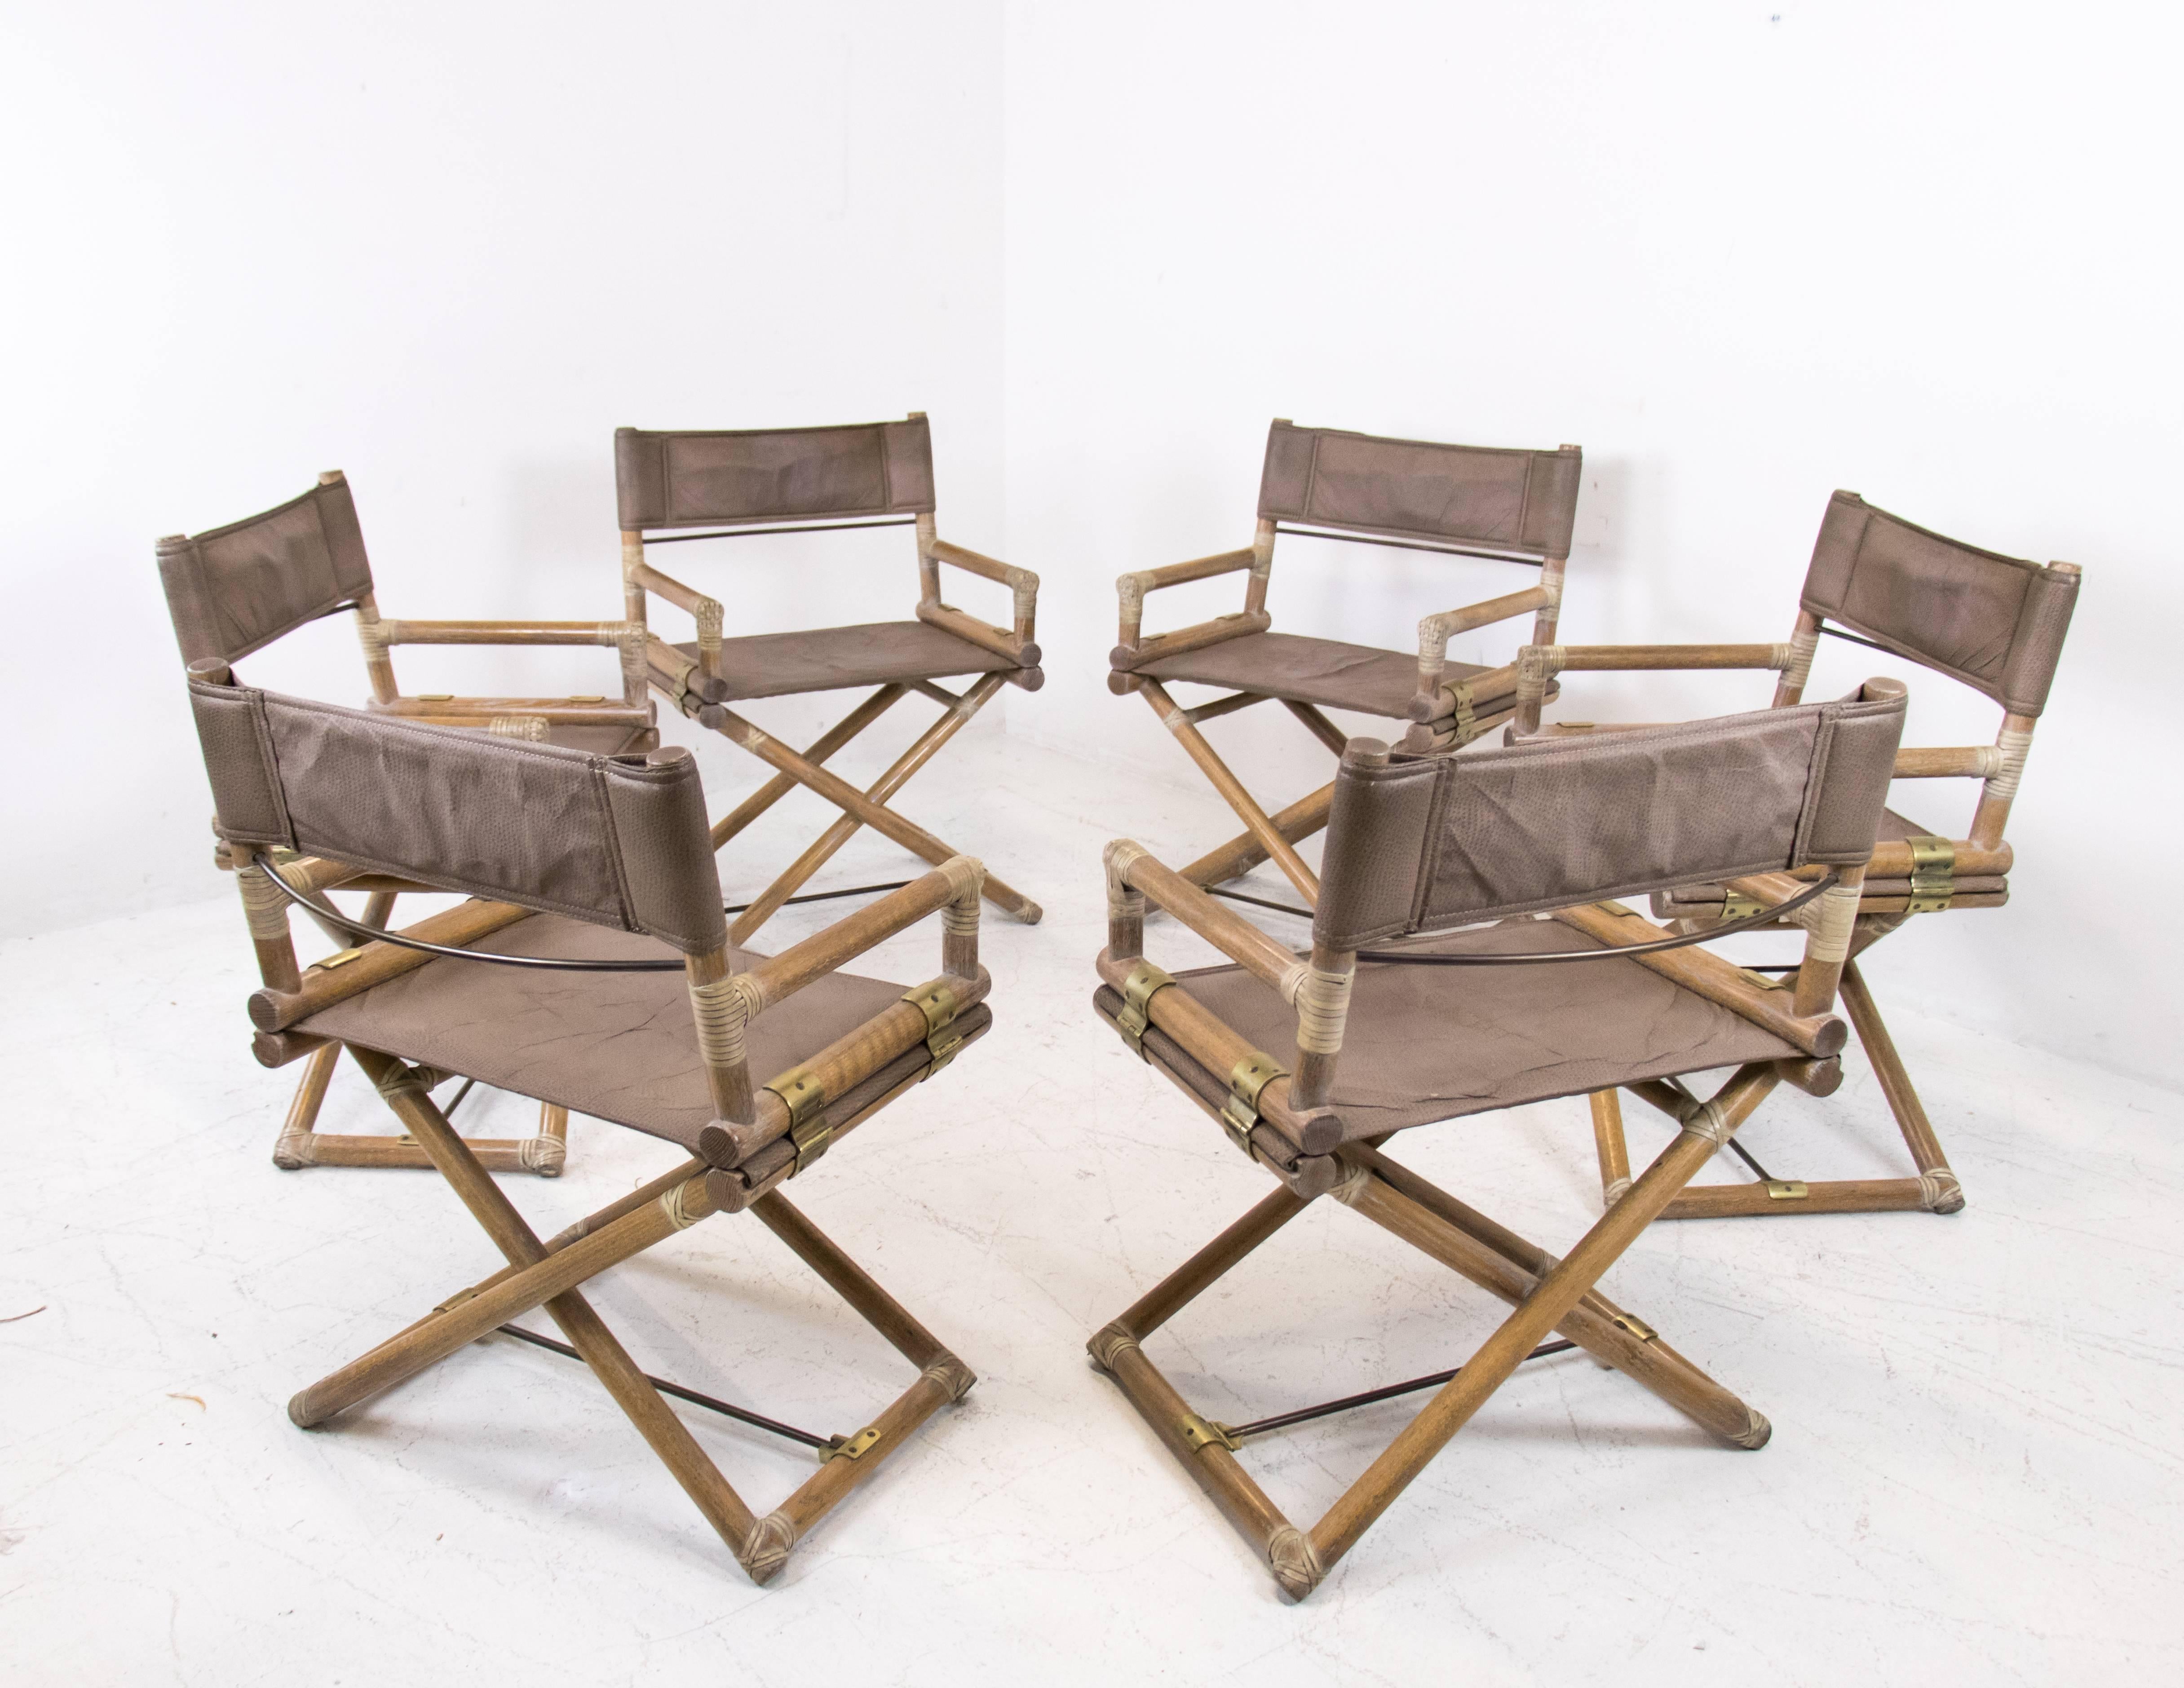 Set of six McGuire bamboo campaign chairs with pigskin upholstery. These chairs are in good vintage condition with signs of wear due to age and use.

Dimensions: 23" W x 22" D x 33.5" T
Seat height 18".